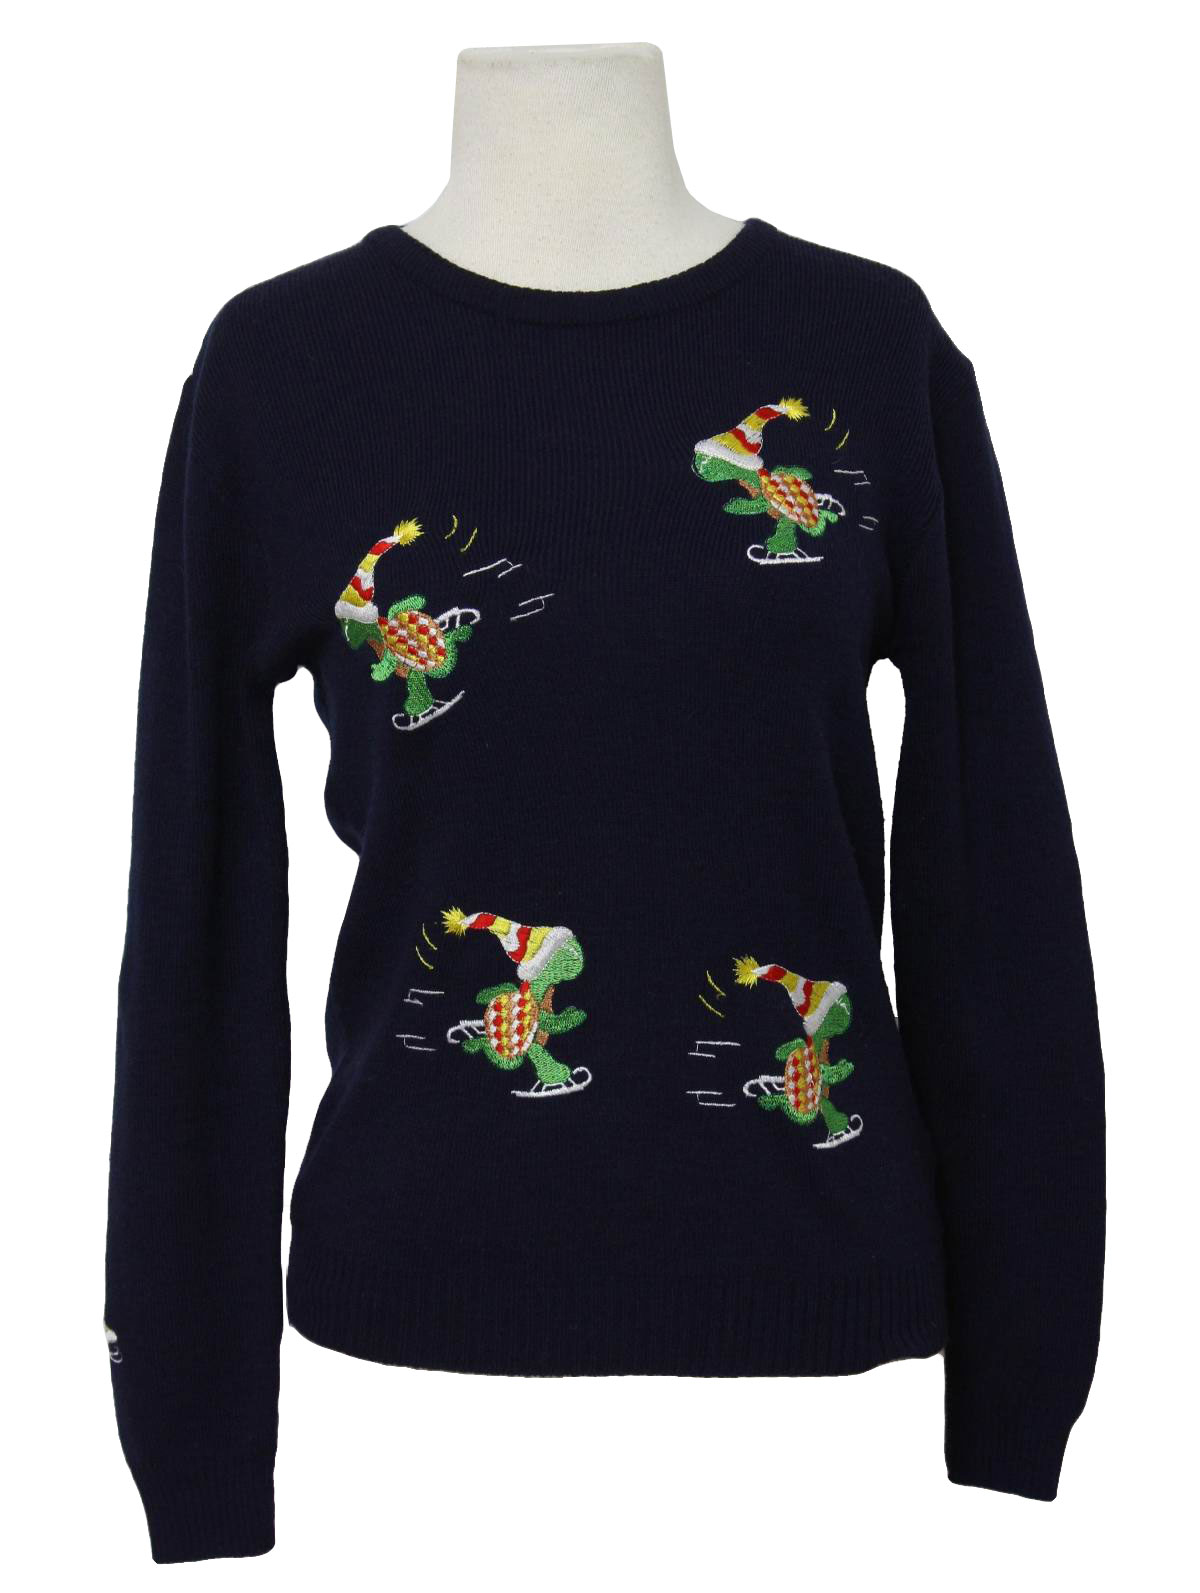 Retro 70s Sweater: 70s -no label- Womens or girls navy blue acrylic ...